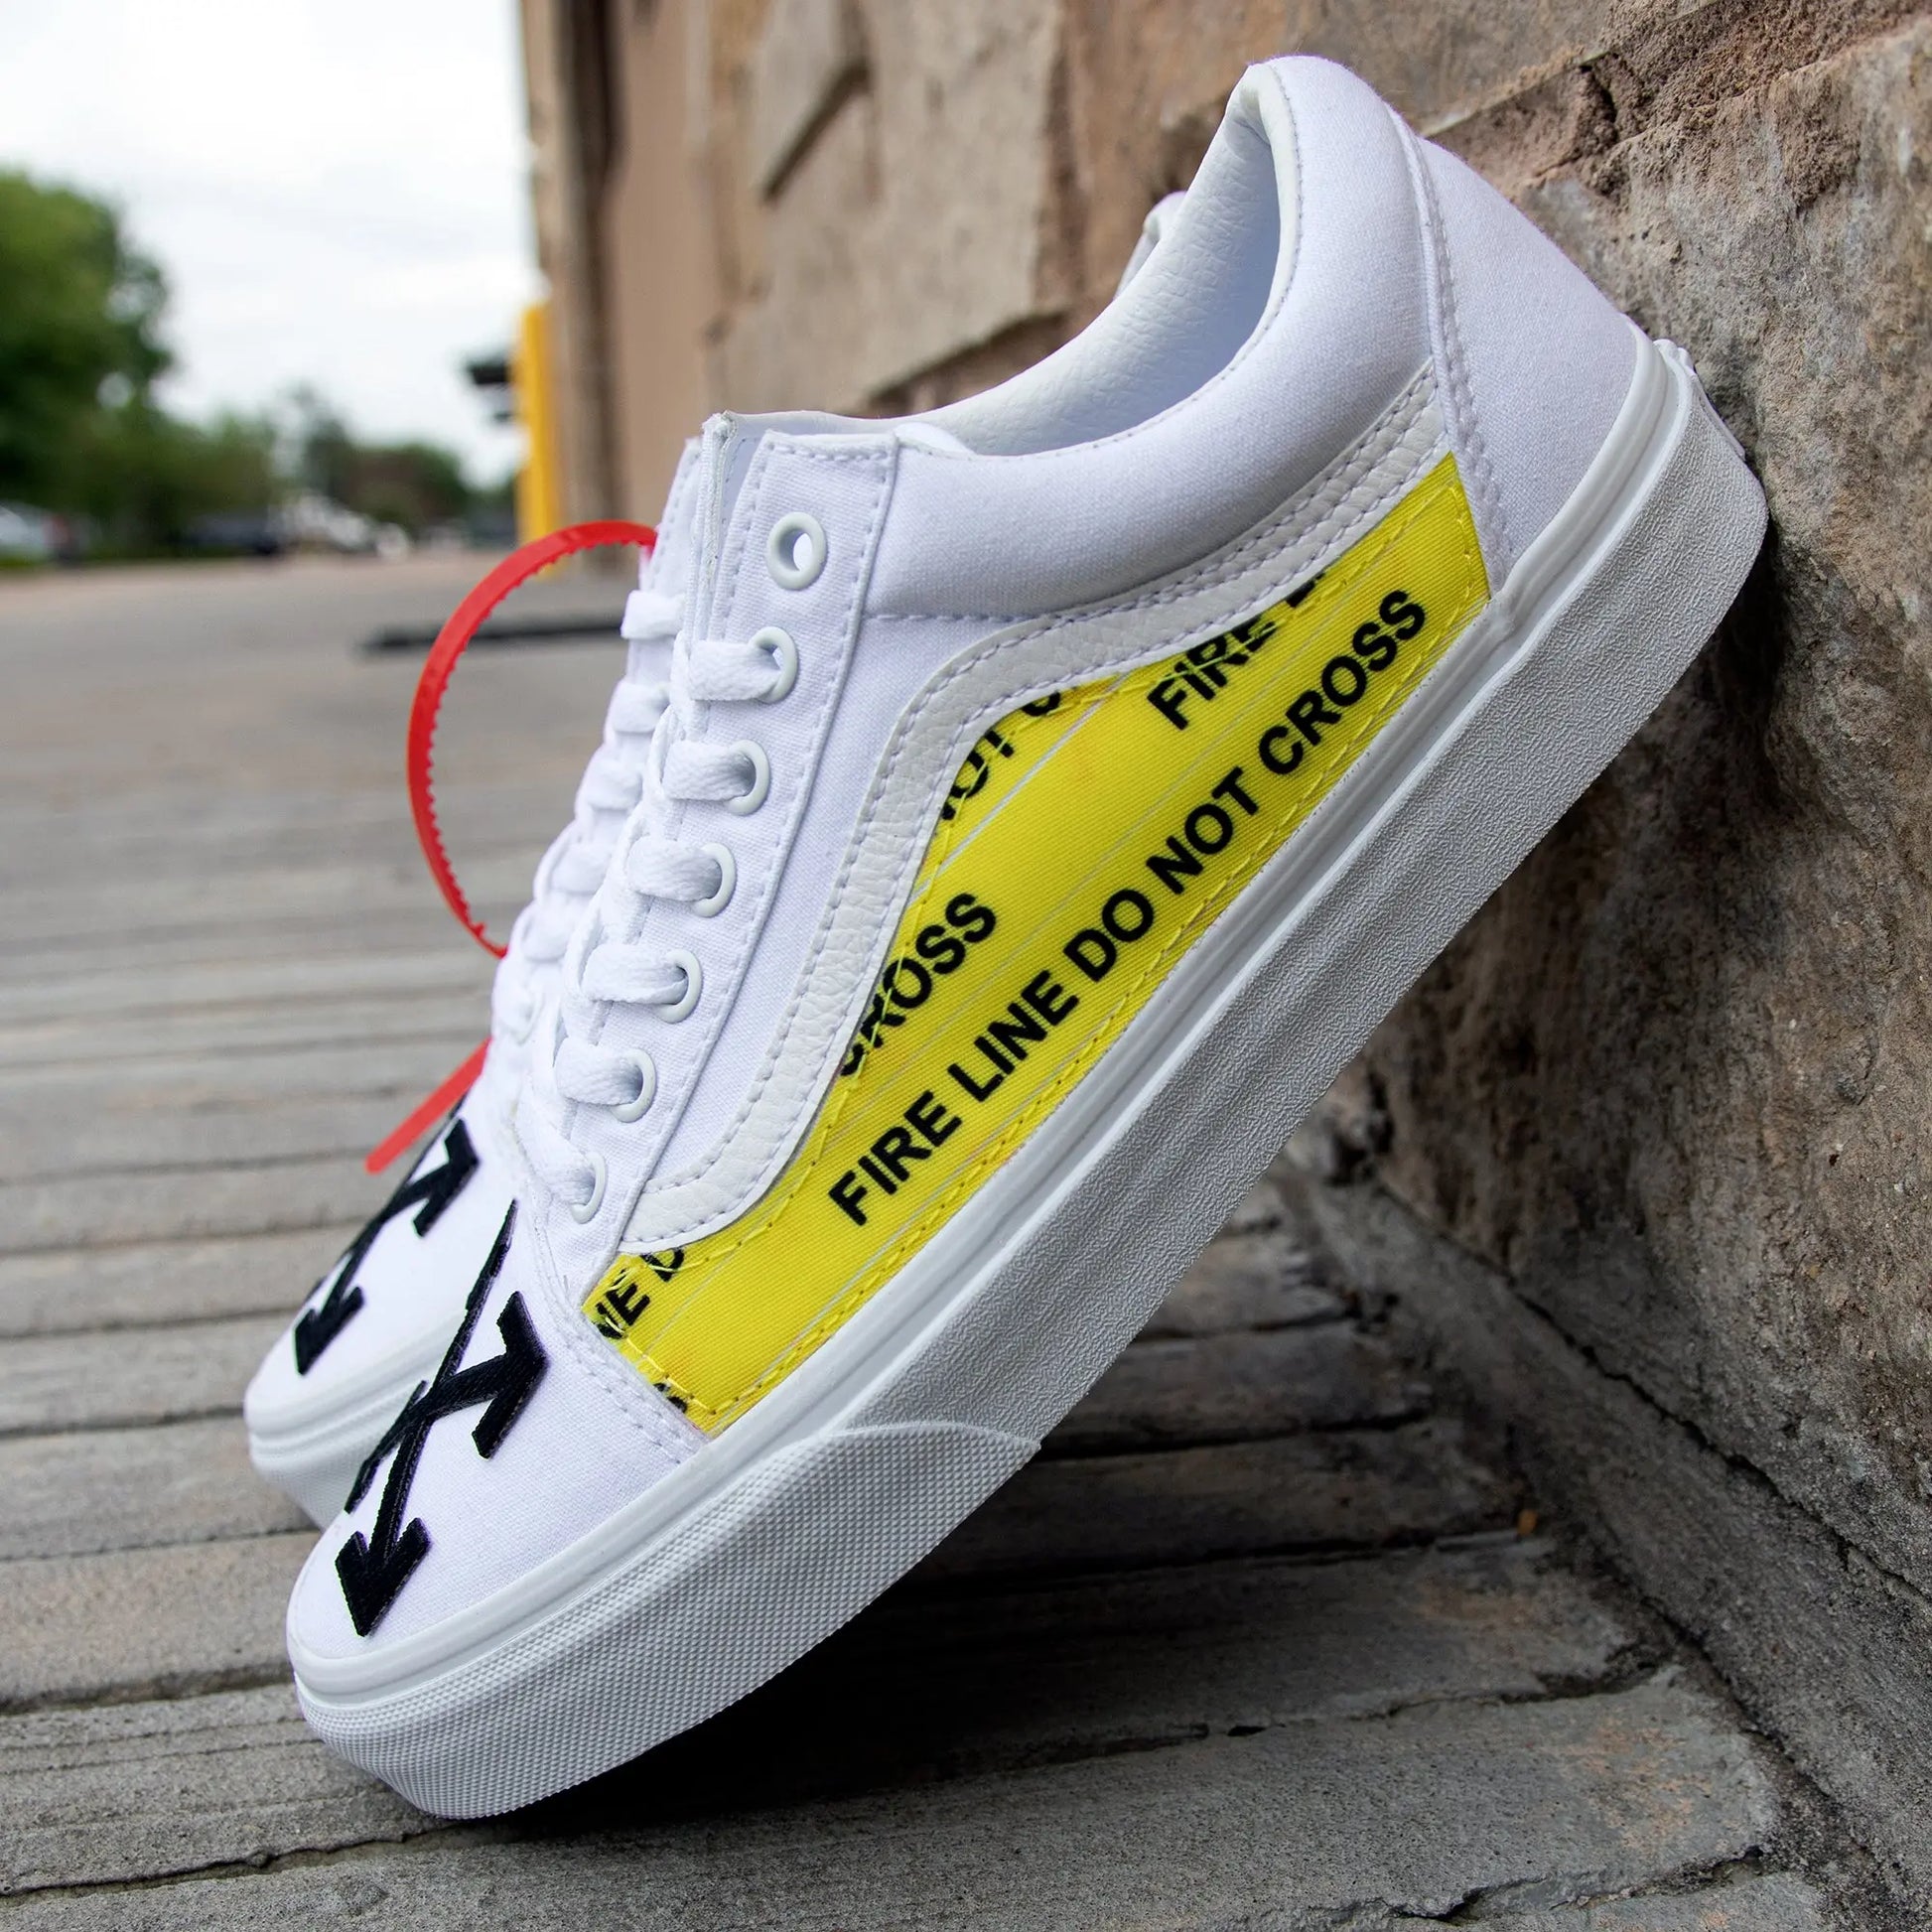 Vans White Old Skool x Authentic GG Fabric Custom Handmade Shoes by Patch Collection Mens 6.5 /Womens 8